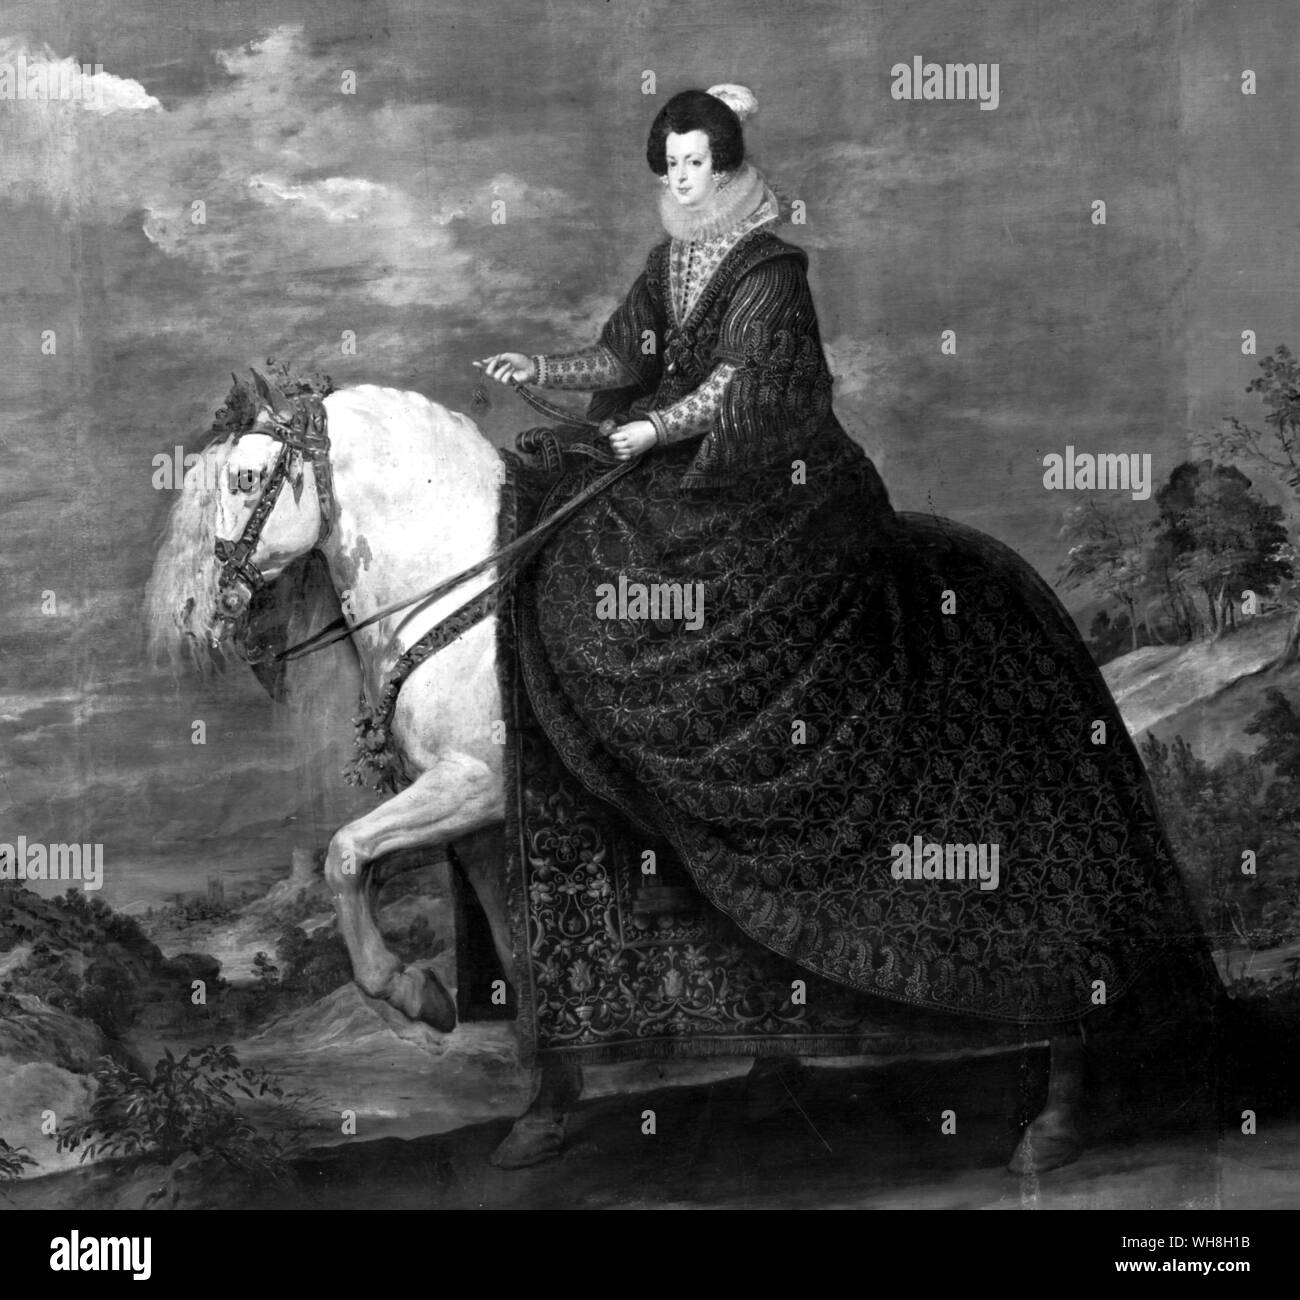 Queen Isabella of Bourbon wore a most elaborate riding habit for her portrait c.1636 by Diego Rodriguez de Silva y Velazquez (1599-1660), court painter to Philip IV of Spain. Encyclopedia of the Horse page 293.. . . . Stock Photo